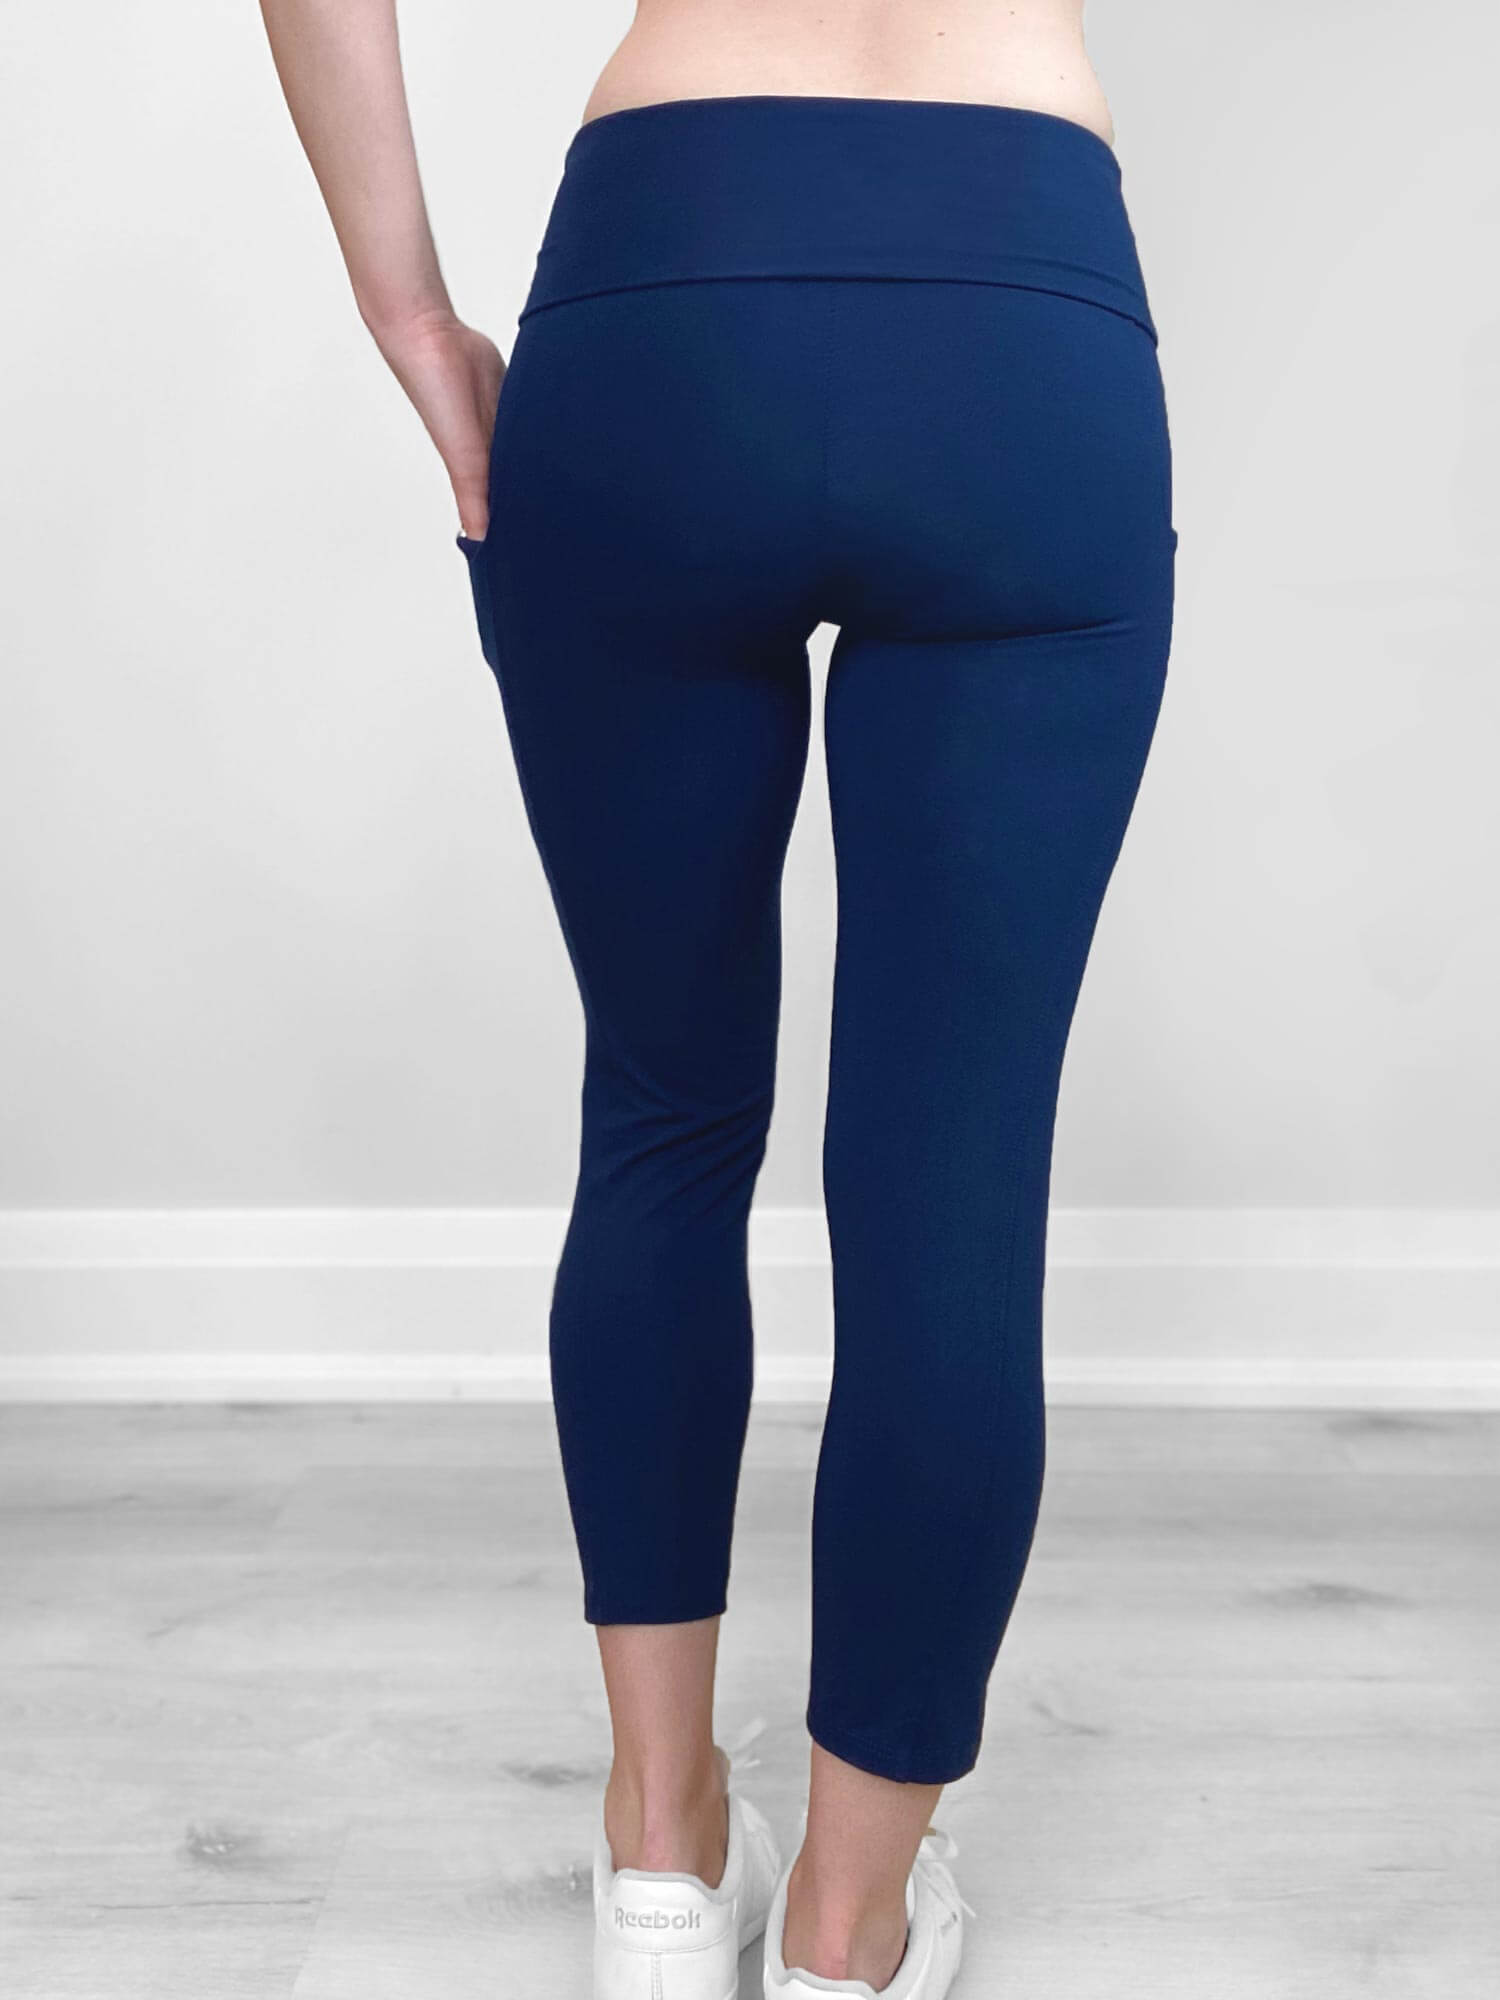 bawilom Womens Capri Leggings with Pocket, Casual High Waist Stretchy Knee  Length Capris Soft Solid Workout Yoga Short Pants Blue at  Women's  Clothing store